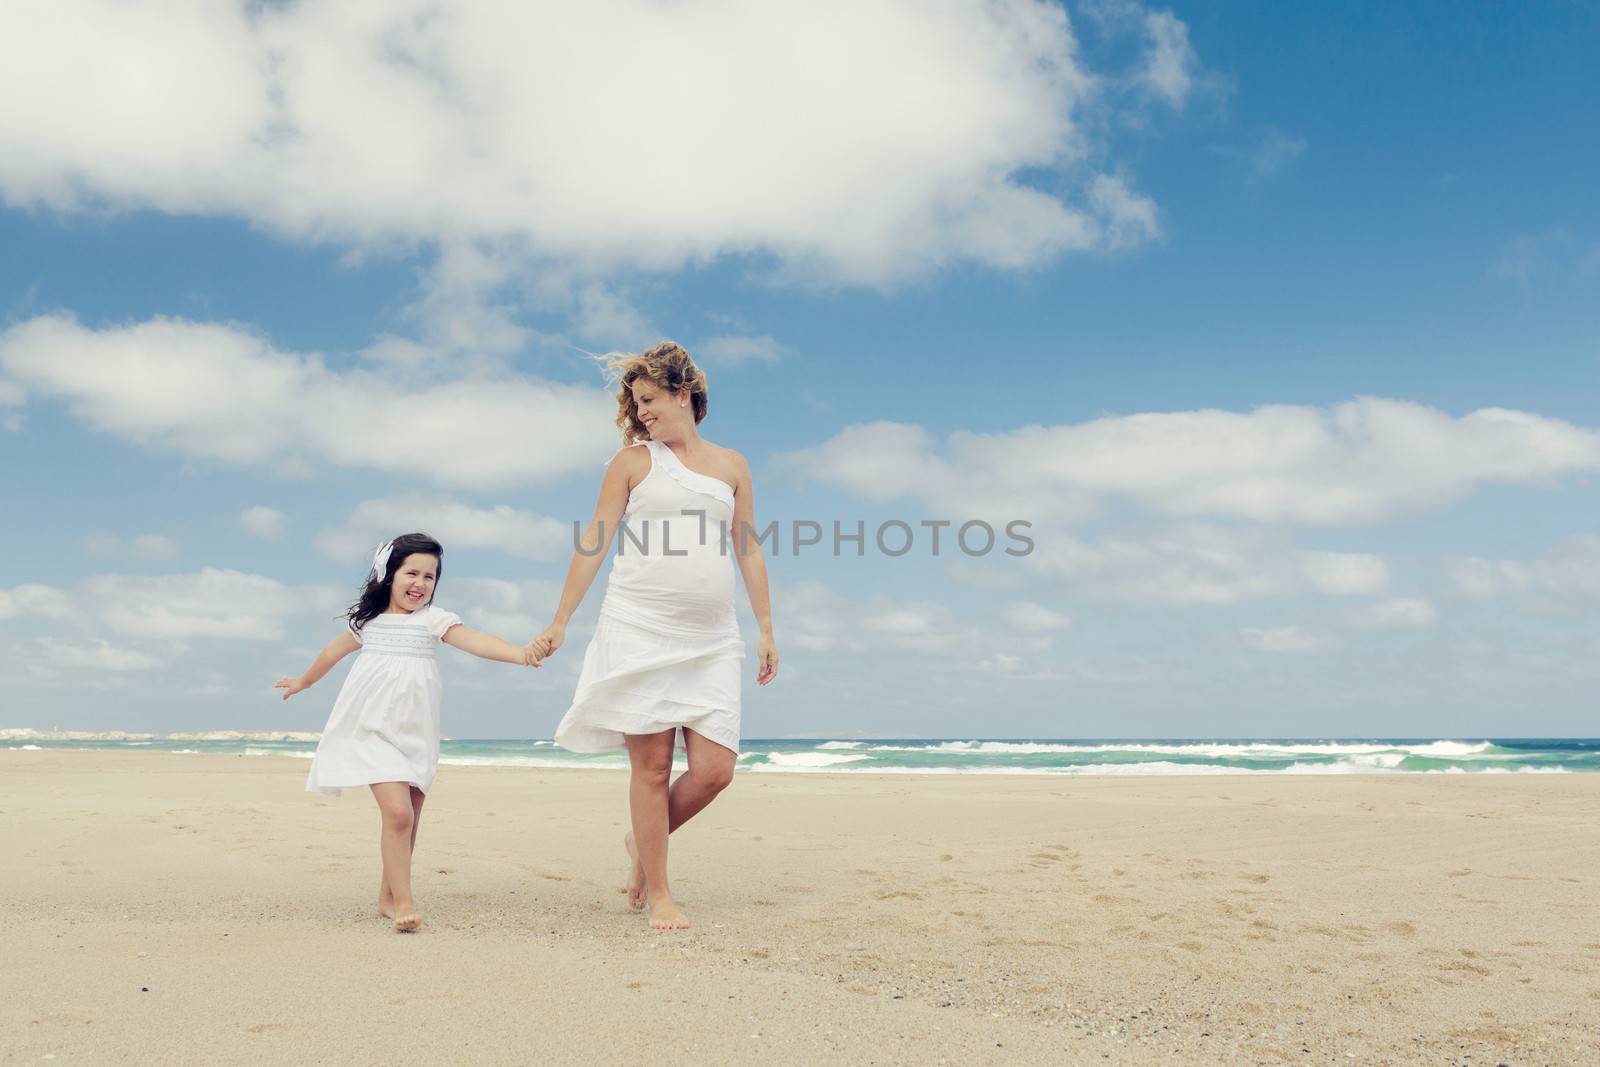 Walking on the beach by Iko